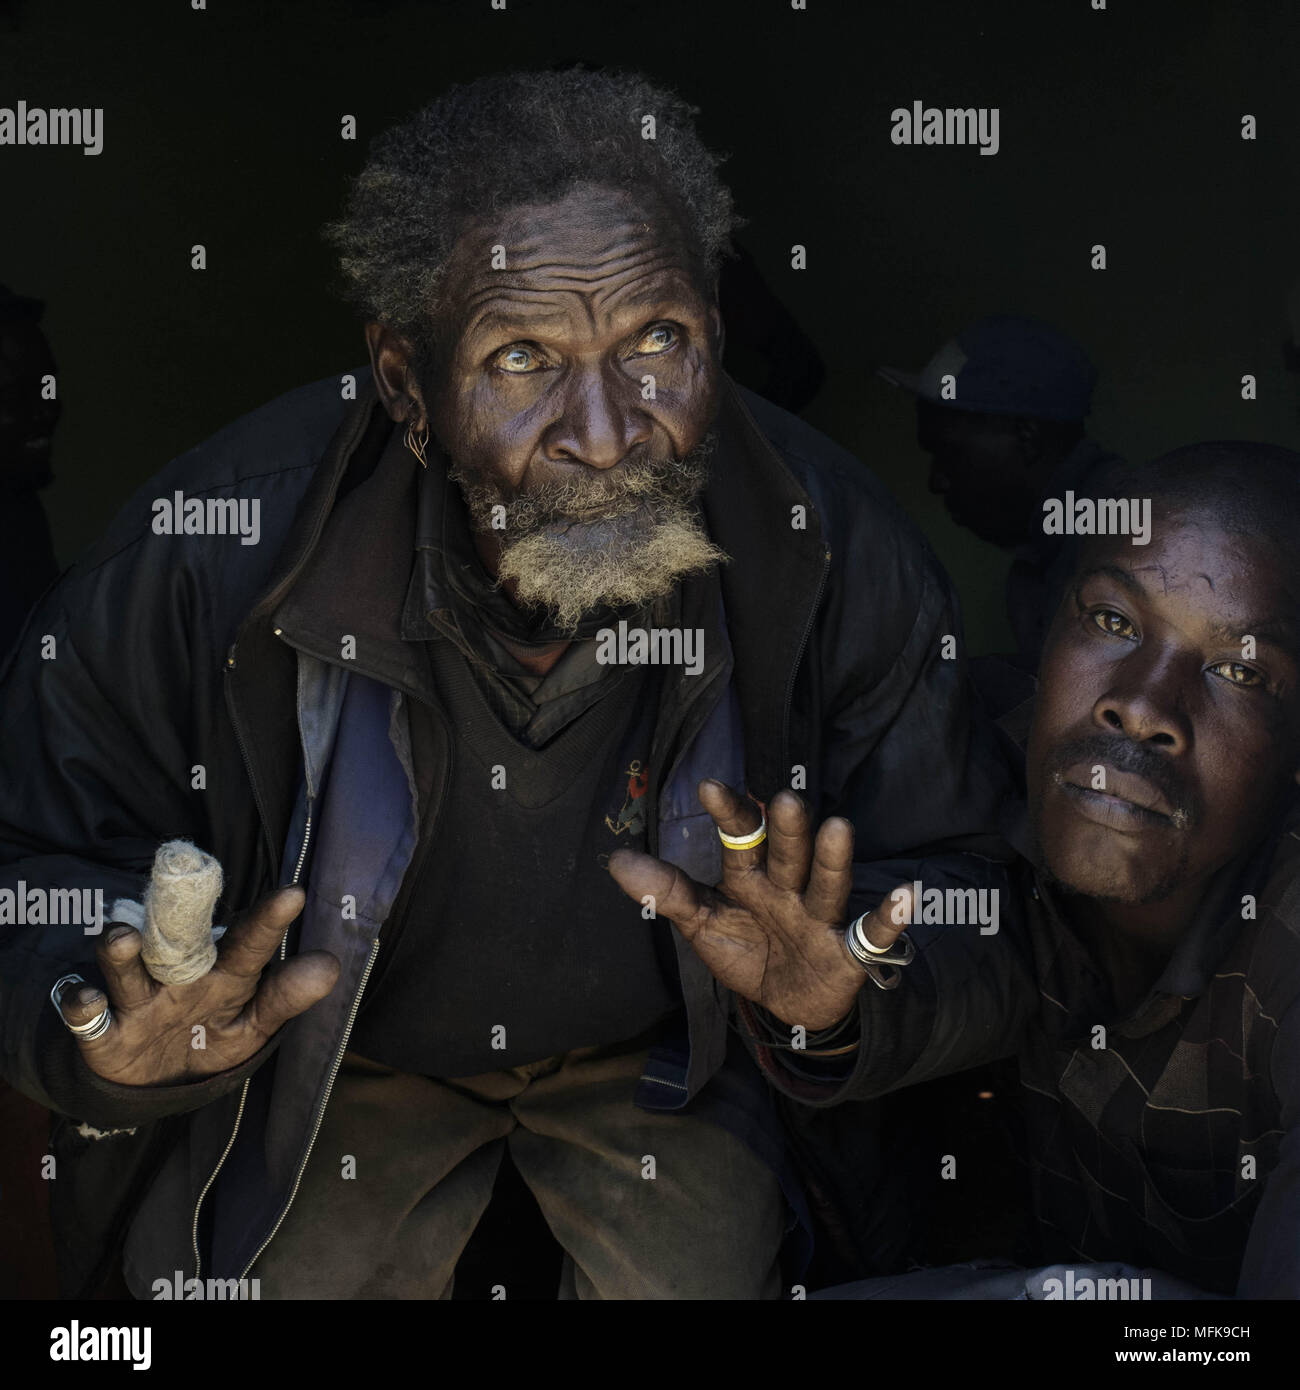 December 8, 2017 - Matatiele, Eastern Cape, South Africa - Malign, 87, attends an initiation ceremony. He worked his entire life underground, digging for gold in the mines of Johannesburg. Next to him is Bulelani, 29, an ex convict. They are friends and support each other. (Credit Image: © Stefan Kleinowitz via ZUMA Wire) Stock Photo